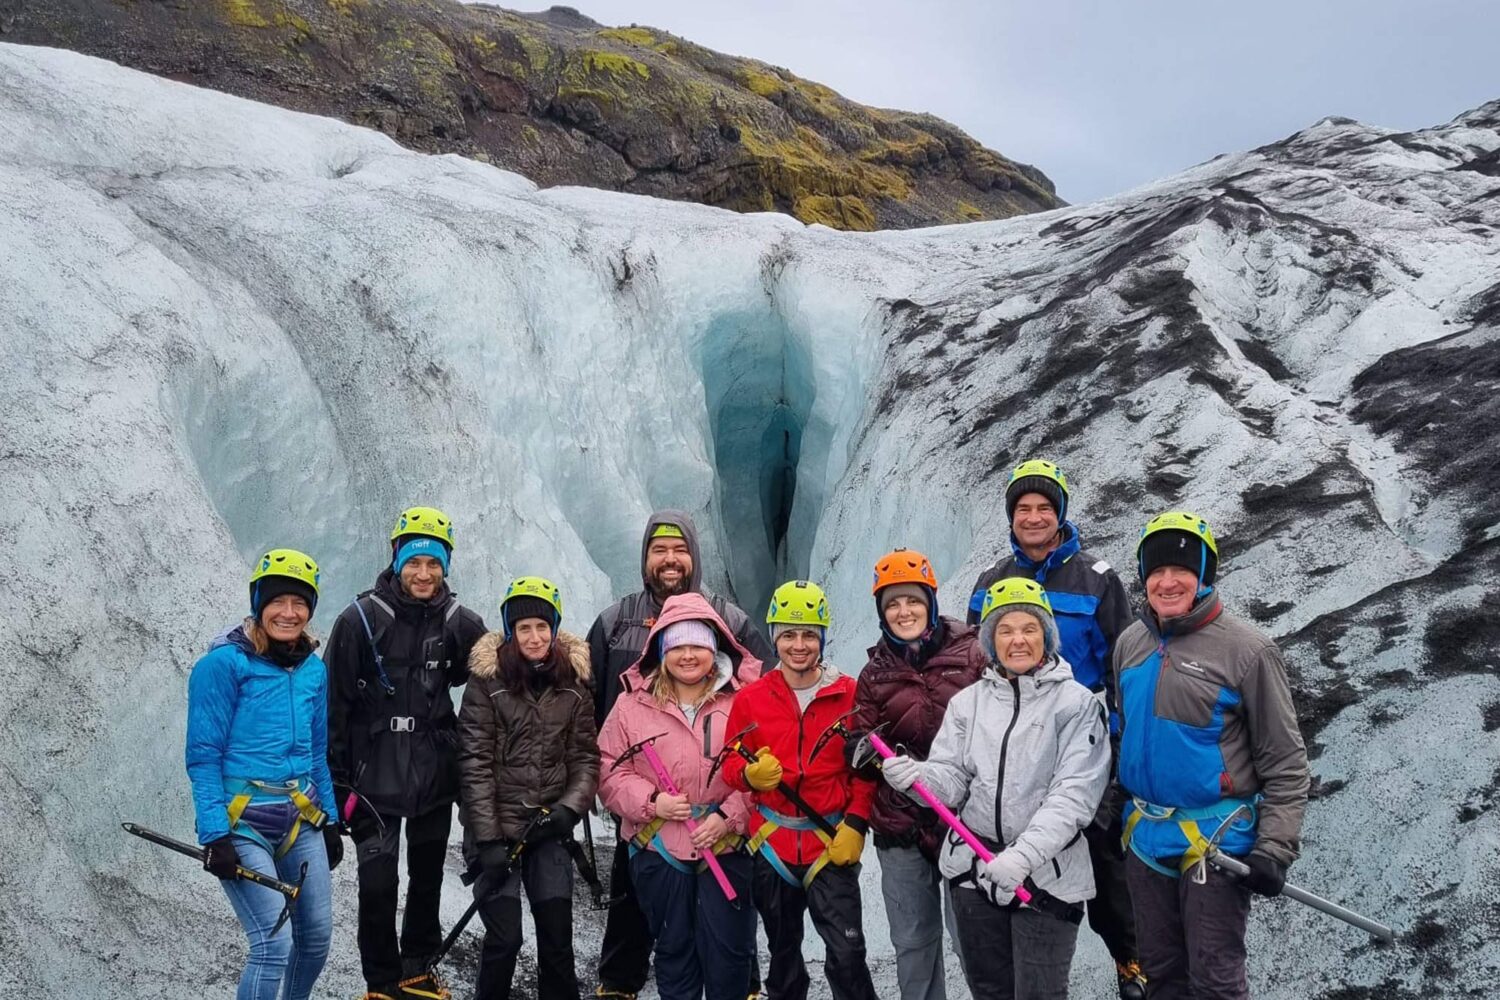 Group photo on the glacier